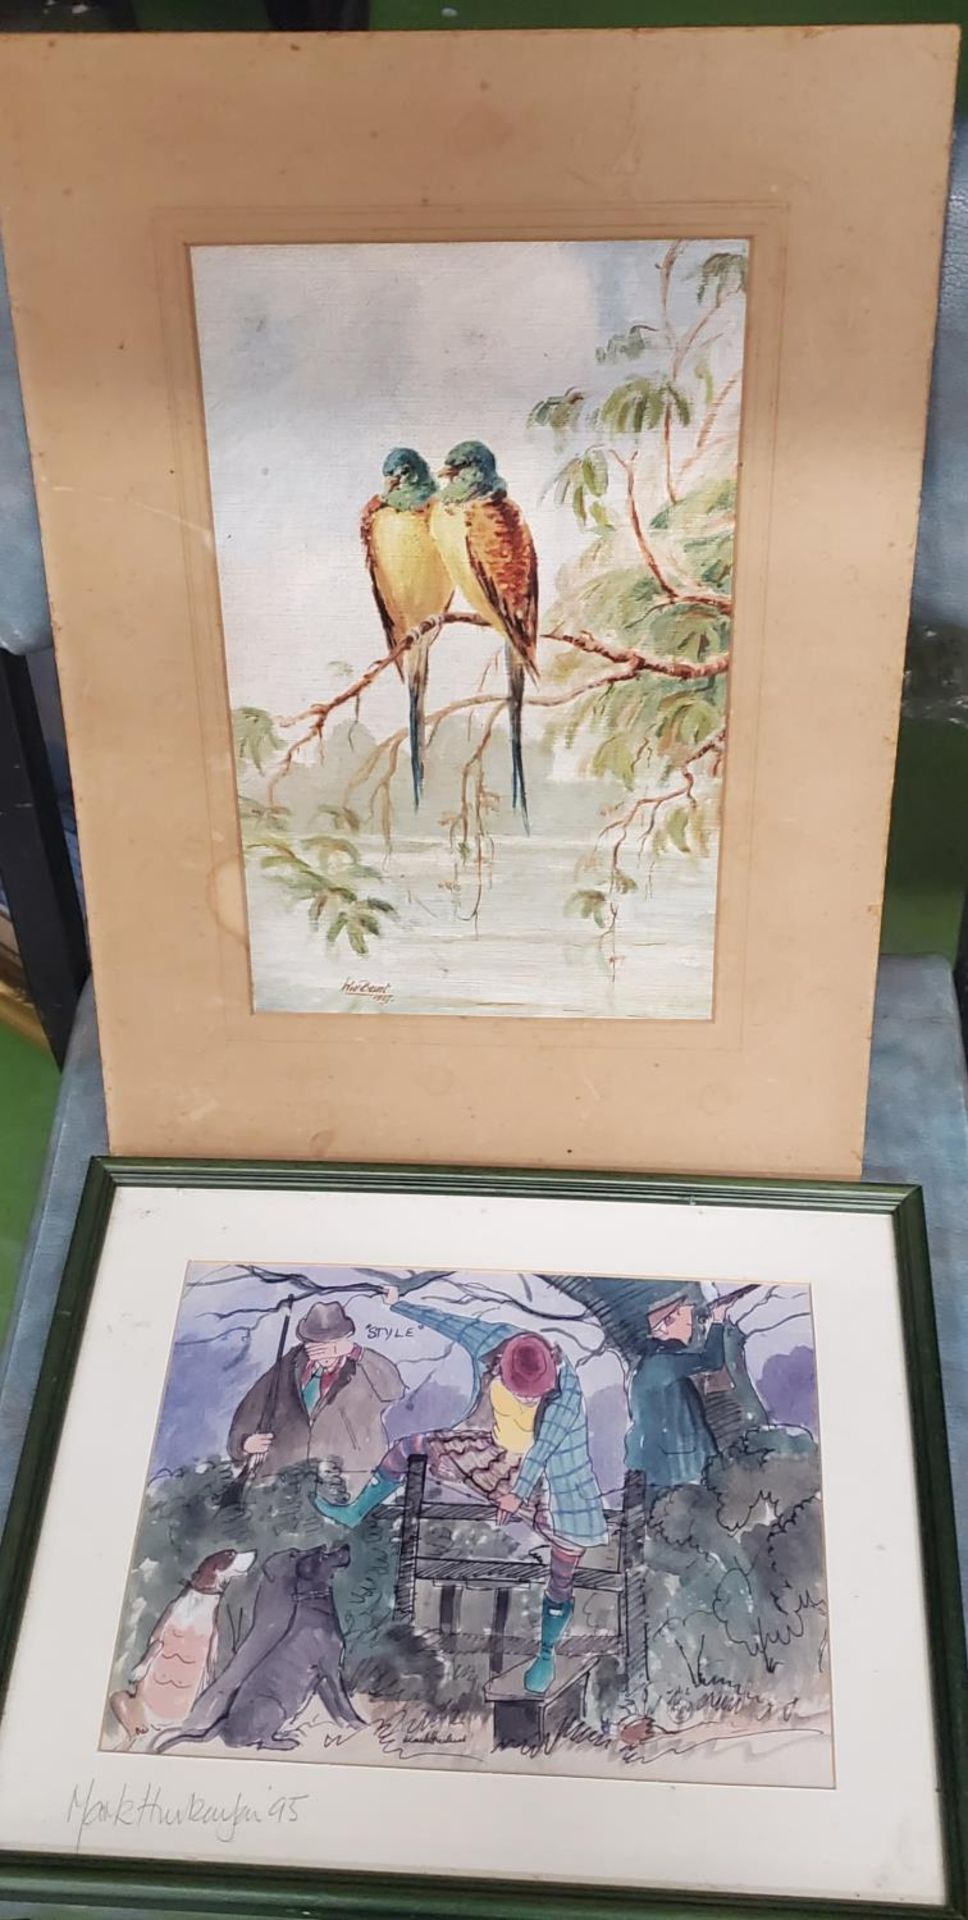 TWO WATERCOLOURS ONE OF TWO BIRDS OF PARADISE ON A BRANCH AND THE OTHER CALLED "STYLE" SIGNED BY THE